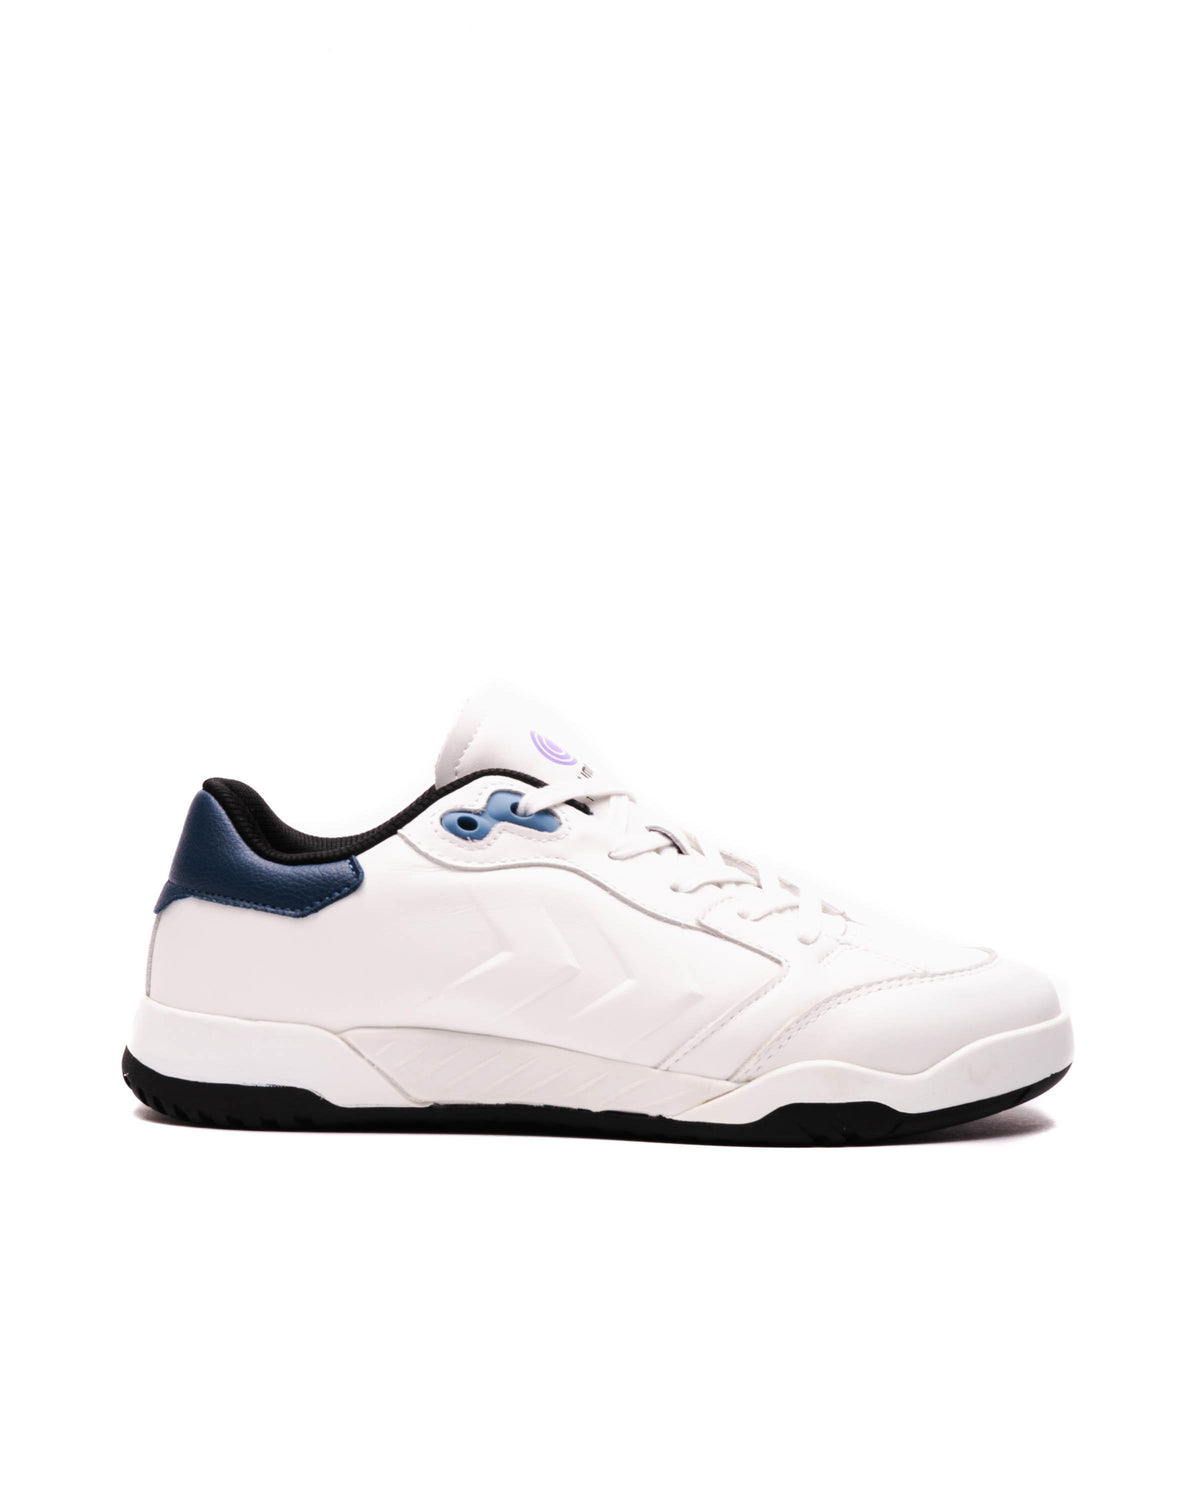 Hummel TOP SPIN REACH LX-E ARCHIVE